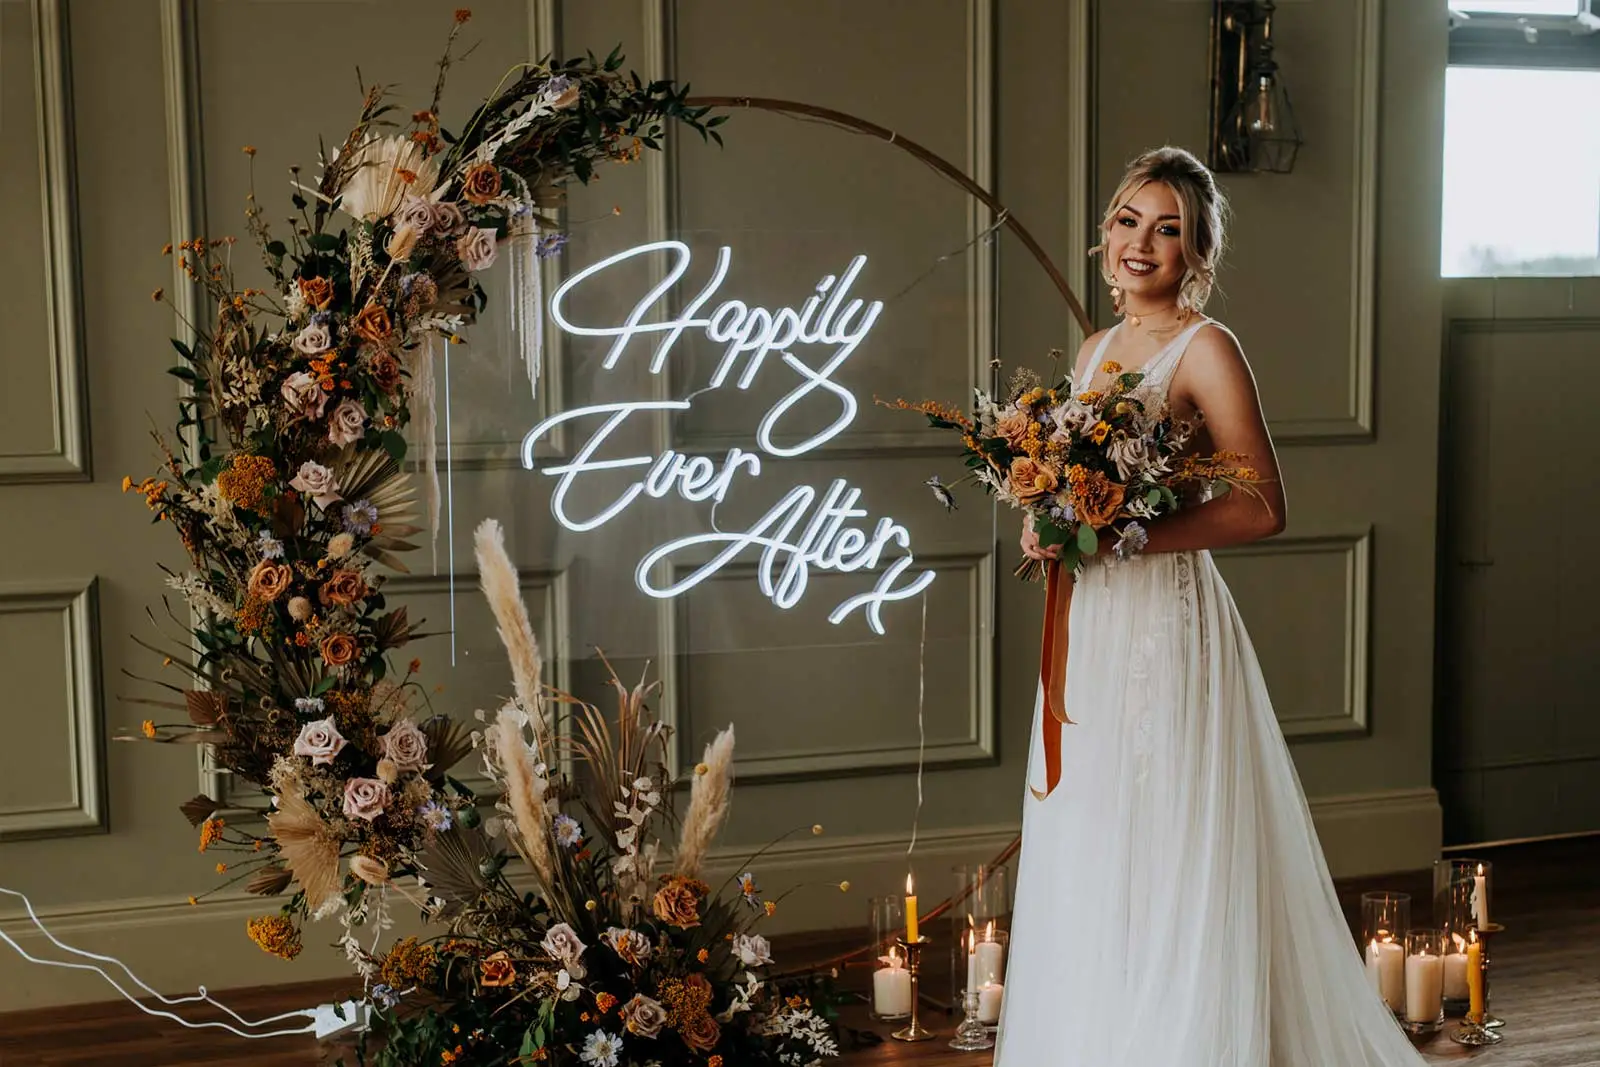 7 Of The Best Yorkshire Wedding Venues (with reviews)